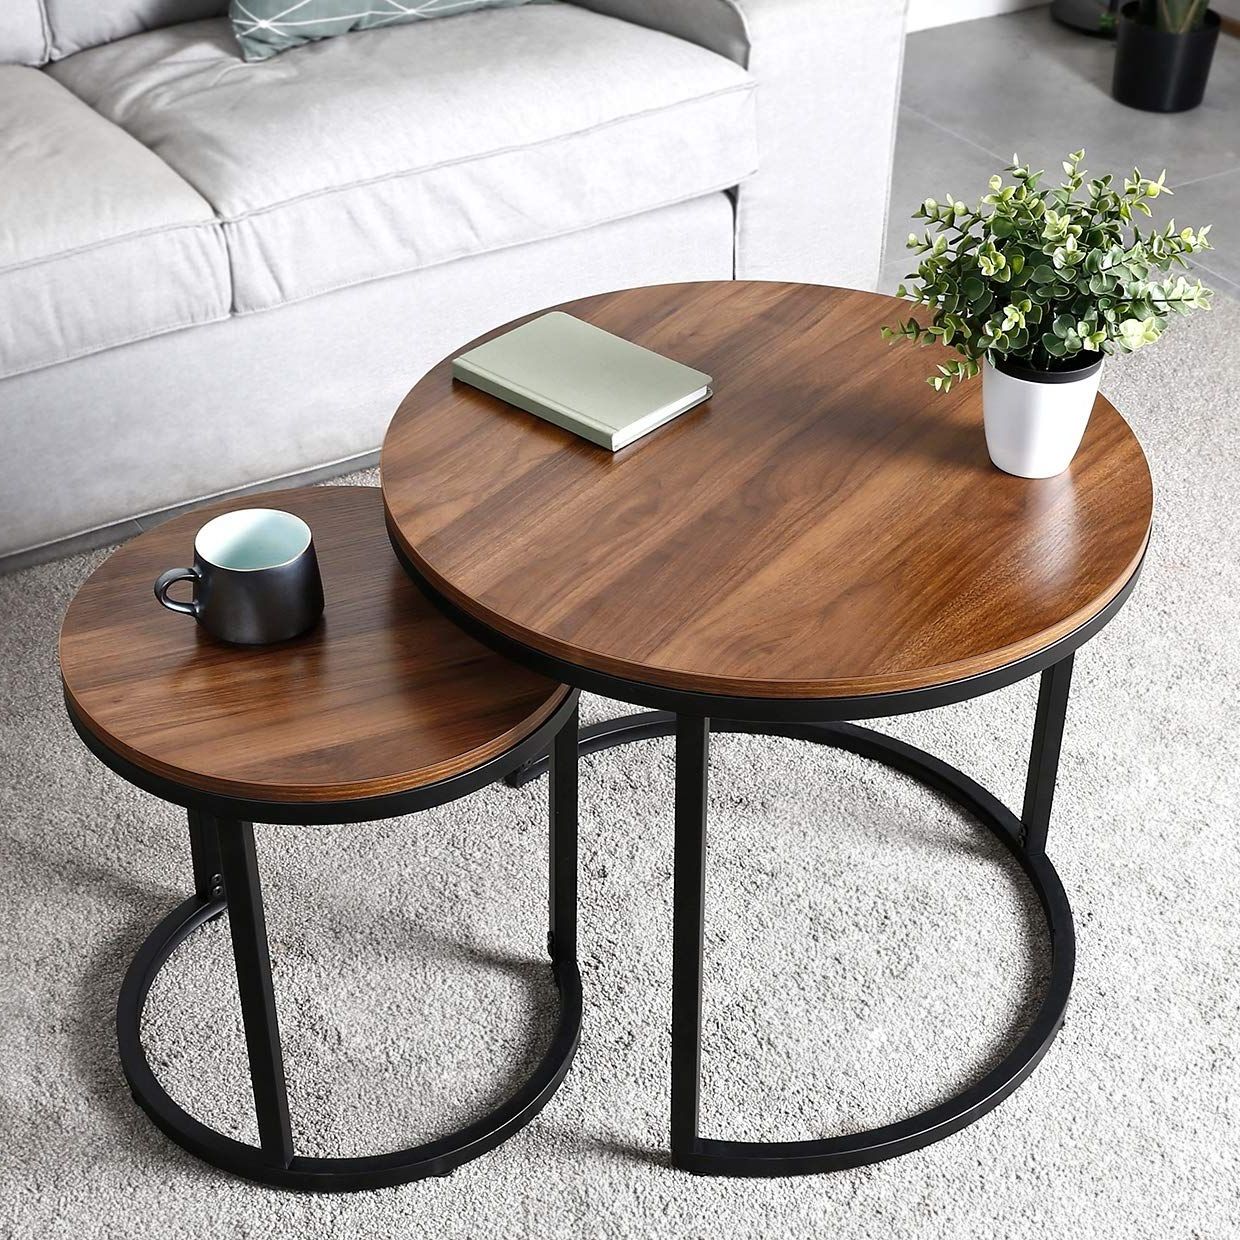 Most Popular 2 Piece Round Coffee Tables Set Regarding Amazonsmile: Amzdeal Coffee Table For Living Room, Set Of (View 13 of 20)